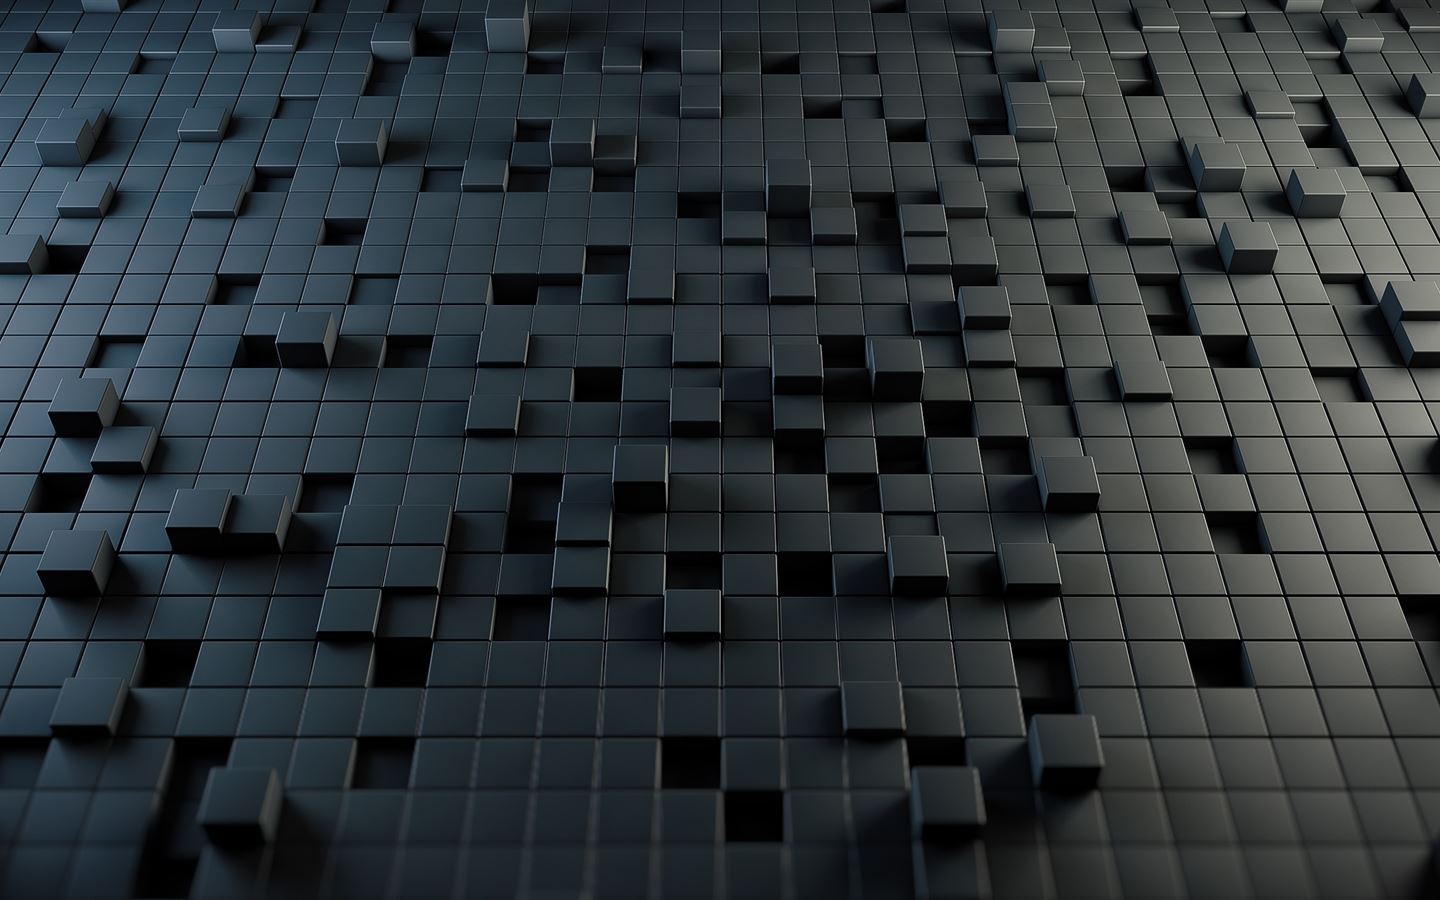 cool 3d wallpapers for mac